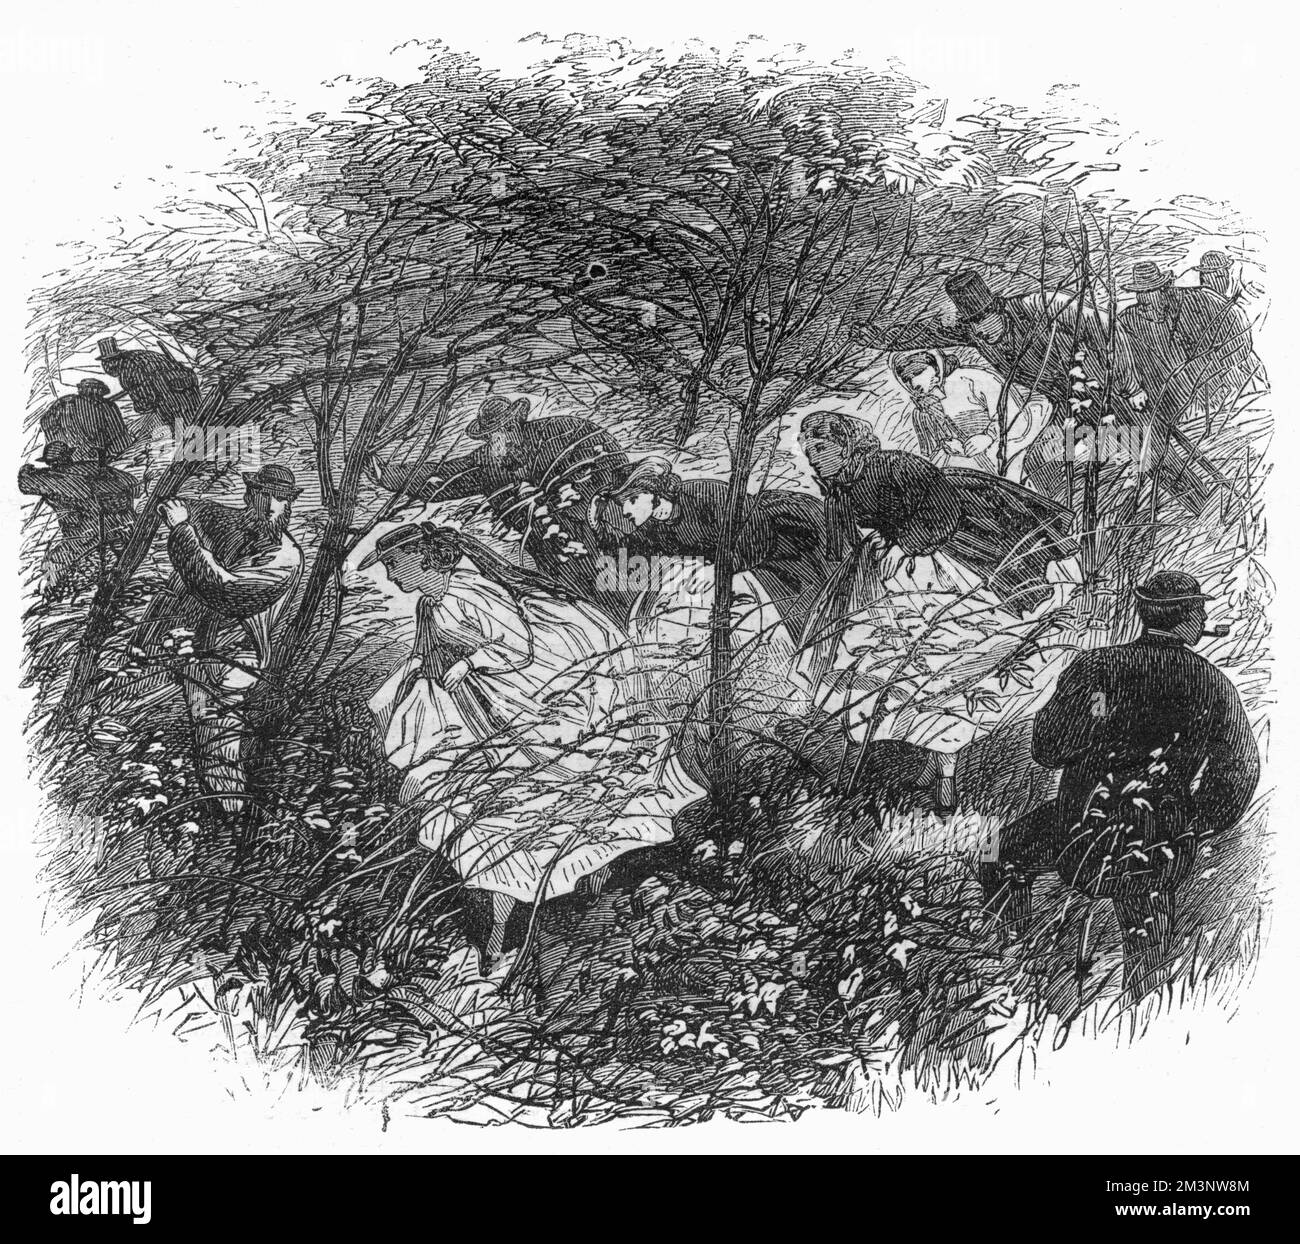 During the meeting of the British Association in Birmingham, an excursion was made to the Wrekin, a hill in Shropshire of geological interest. The party is shown here fighting its way through a tangled wood which slowed their progress.     Date: September 1865 Stock Photo